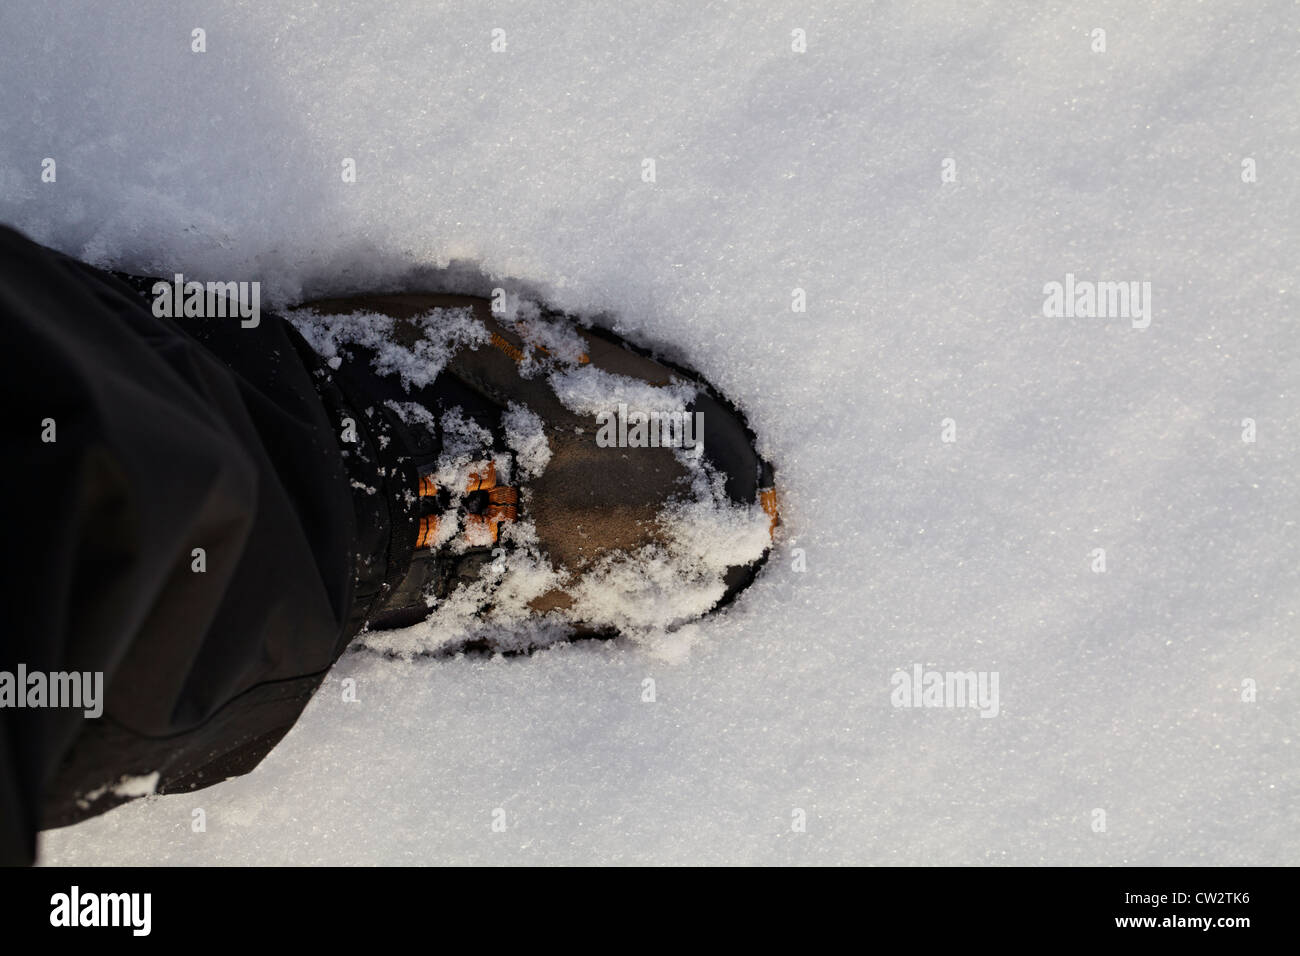 Walking boot in the snow Stock Photo